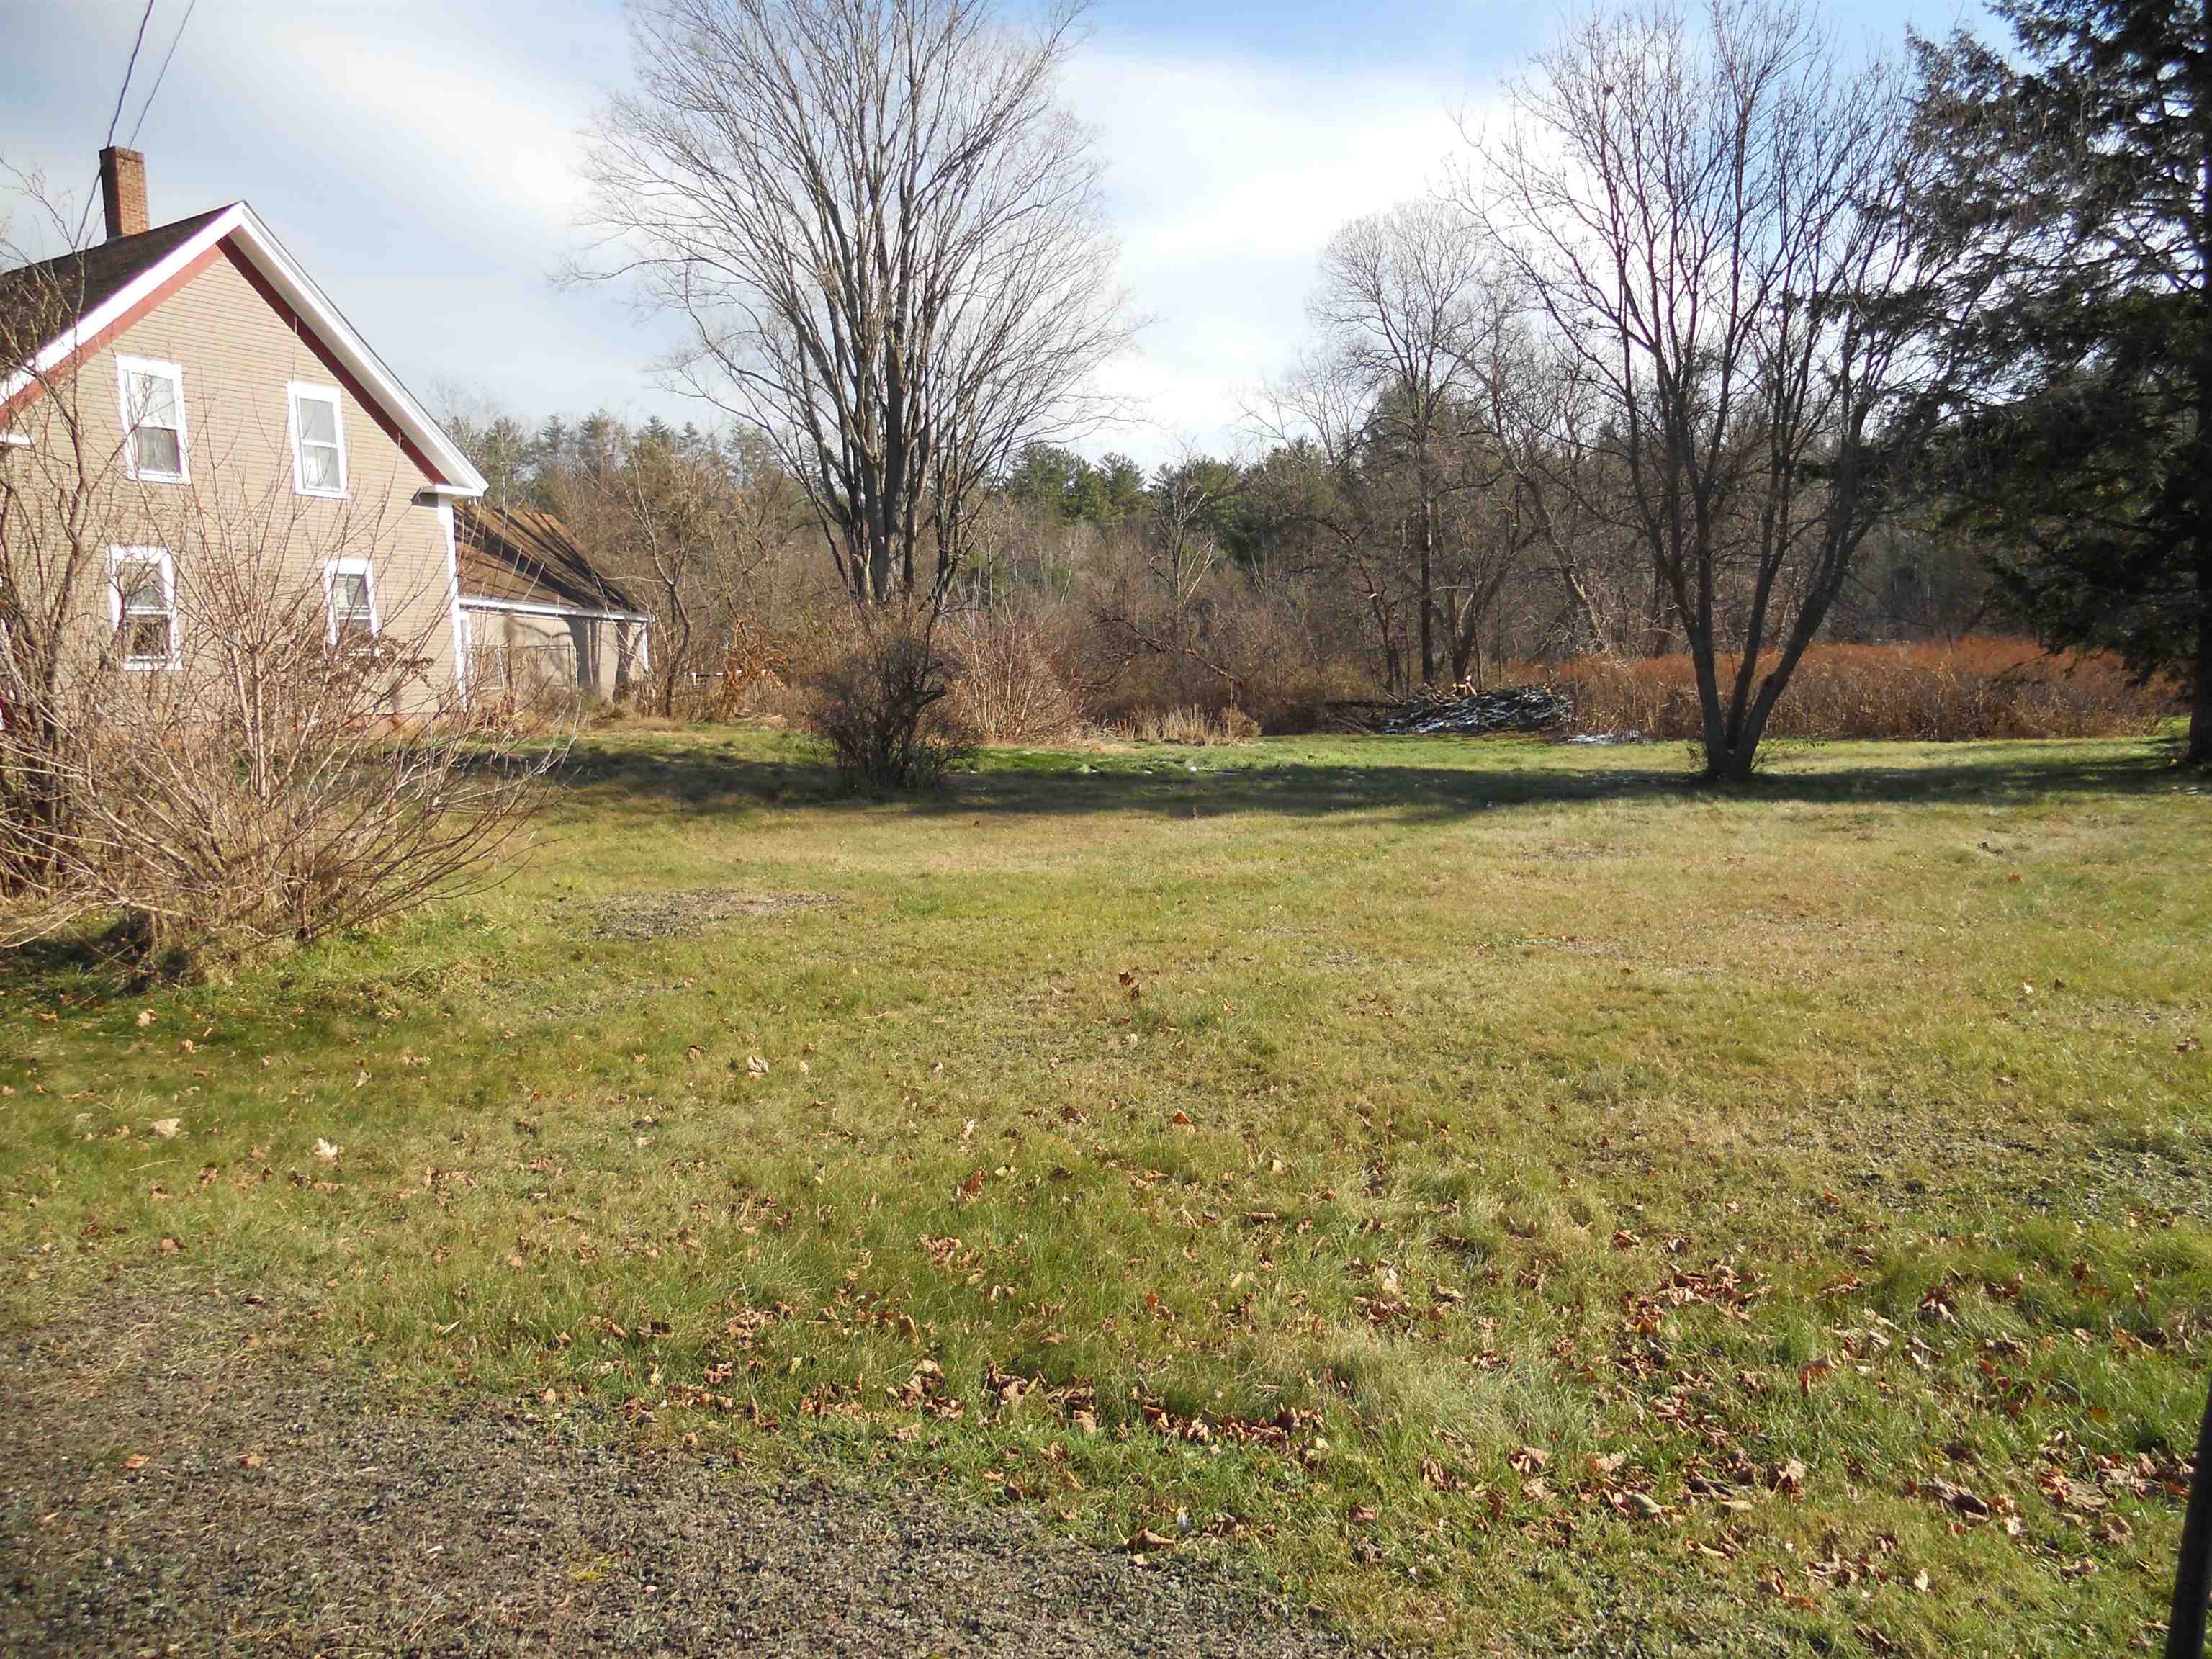 Large Side Yard of 2.6 Acre Lot